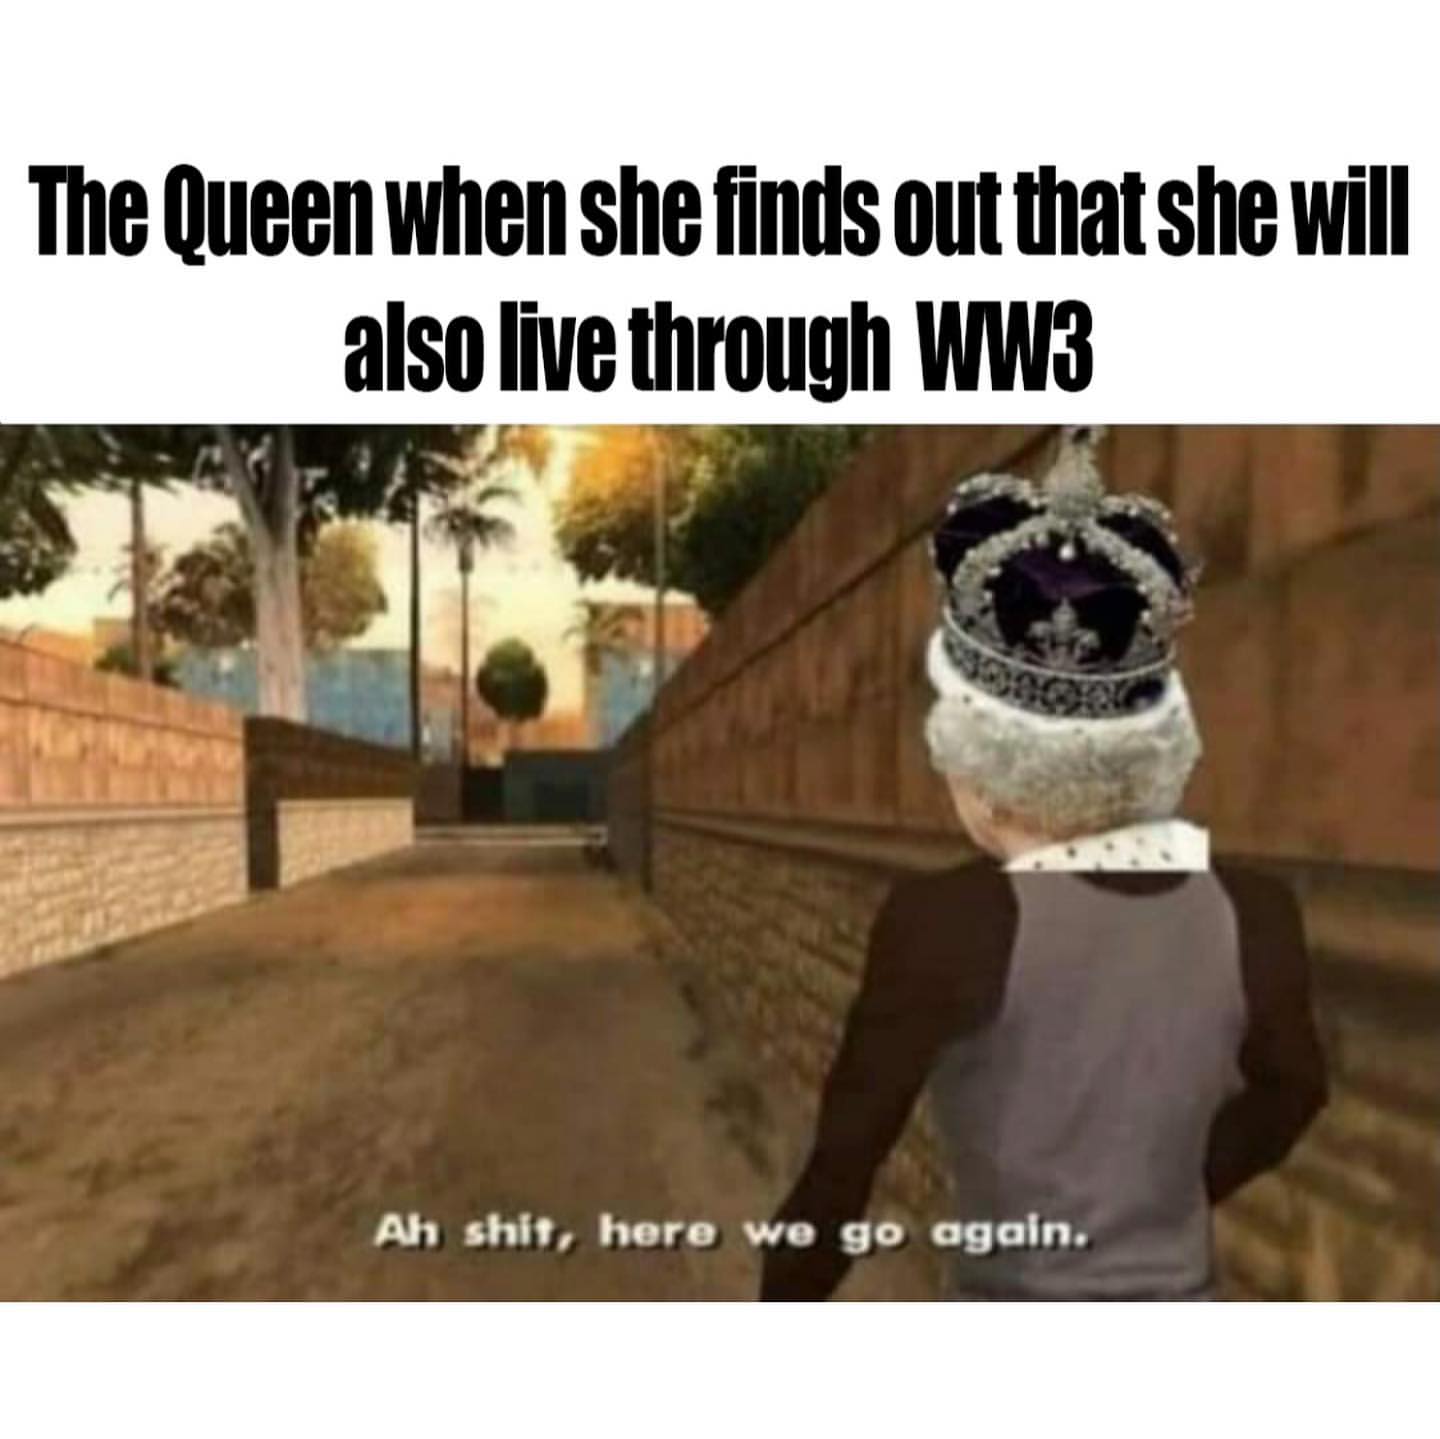 The Queen when she finds out that she will also live through WW3. Ah shit, hero we go again.